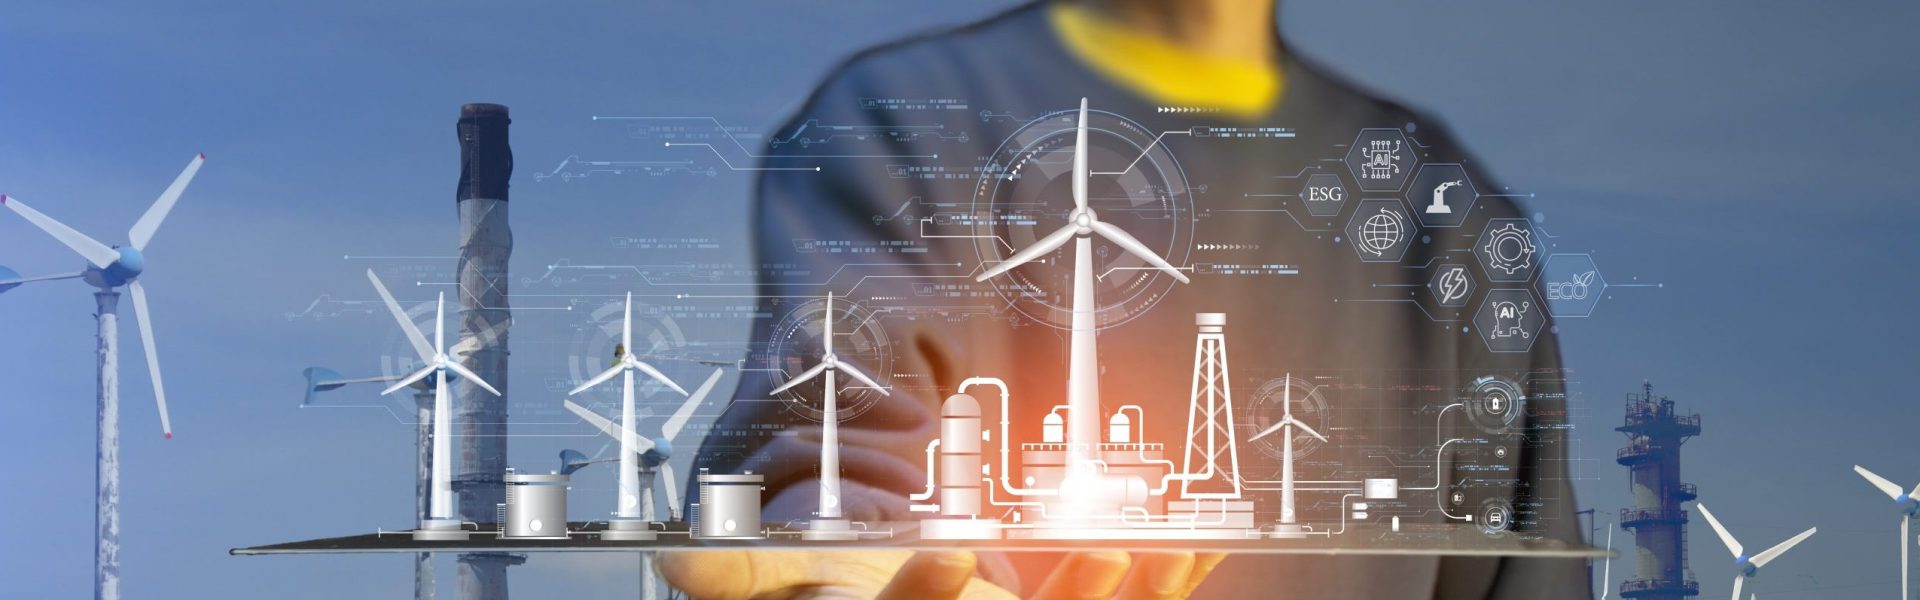 The concept of developing clean energy such as wind energy for energy sustainability. industrial energy 5.0, ECO, ESG, AI